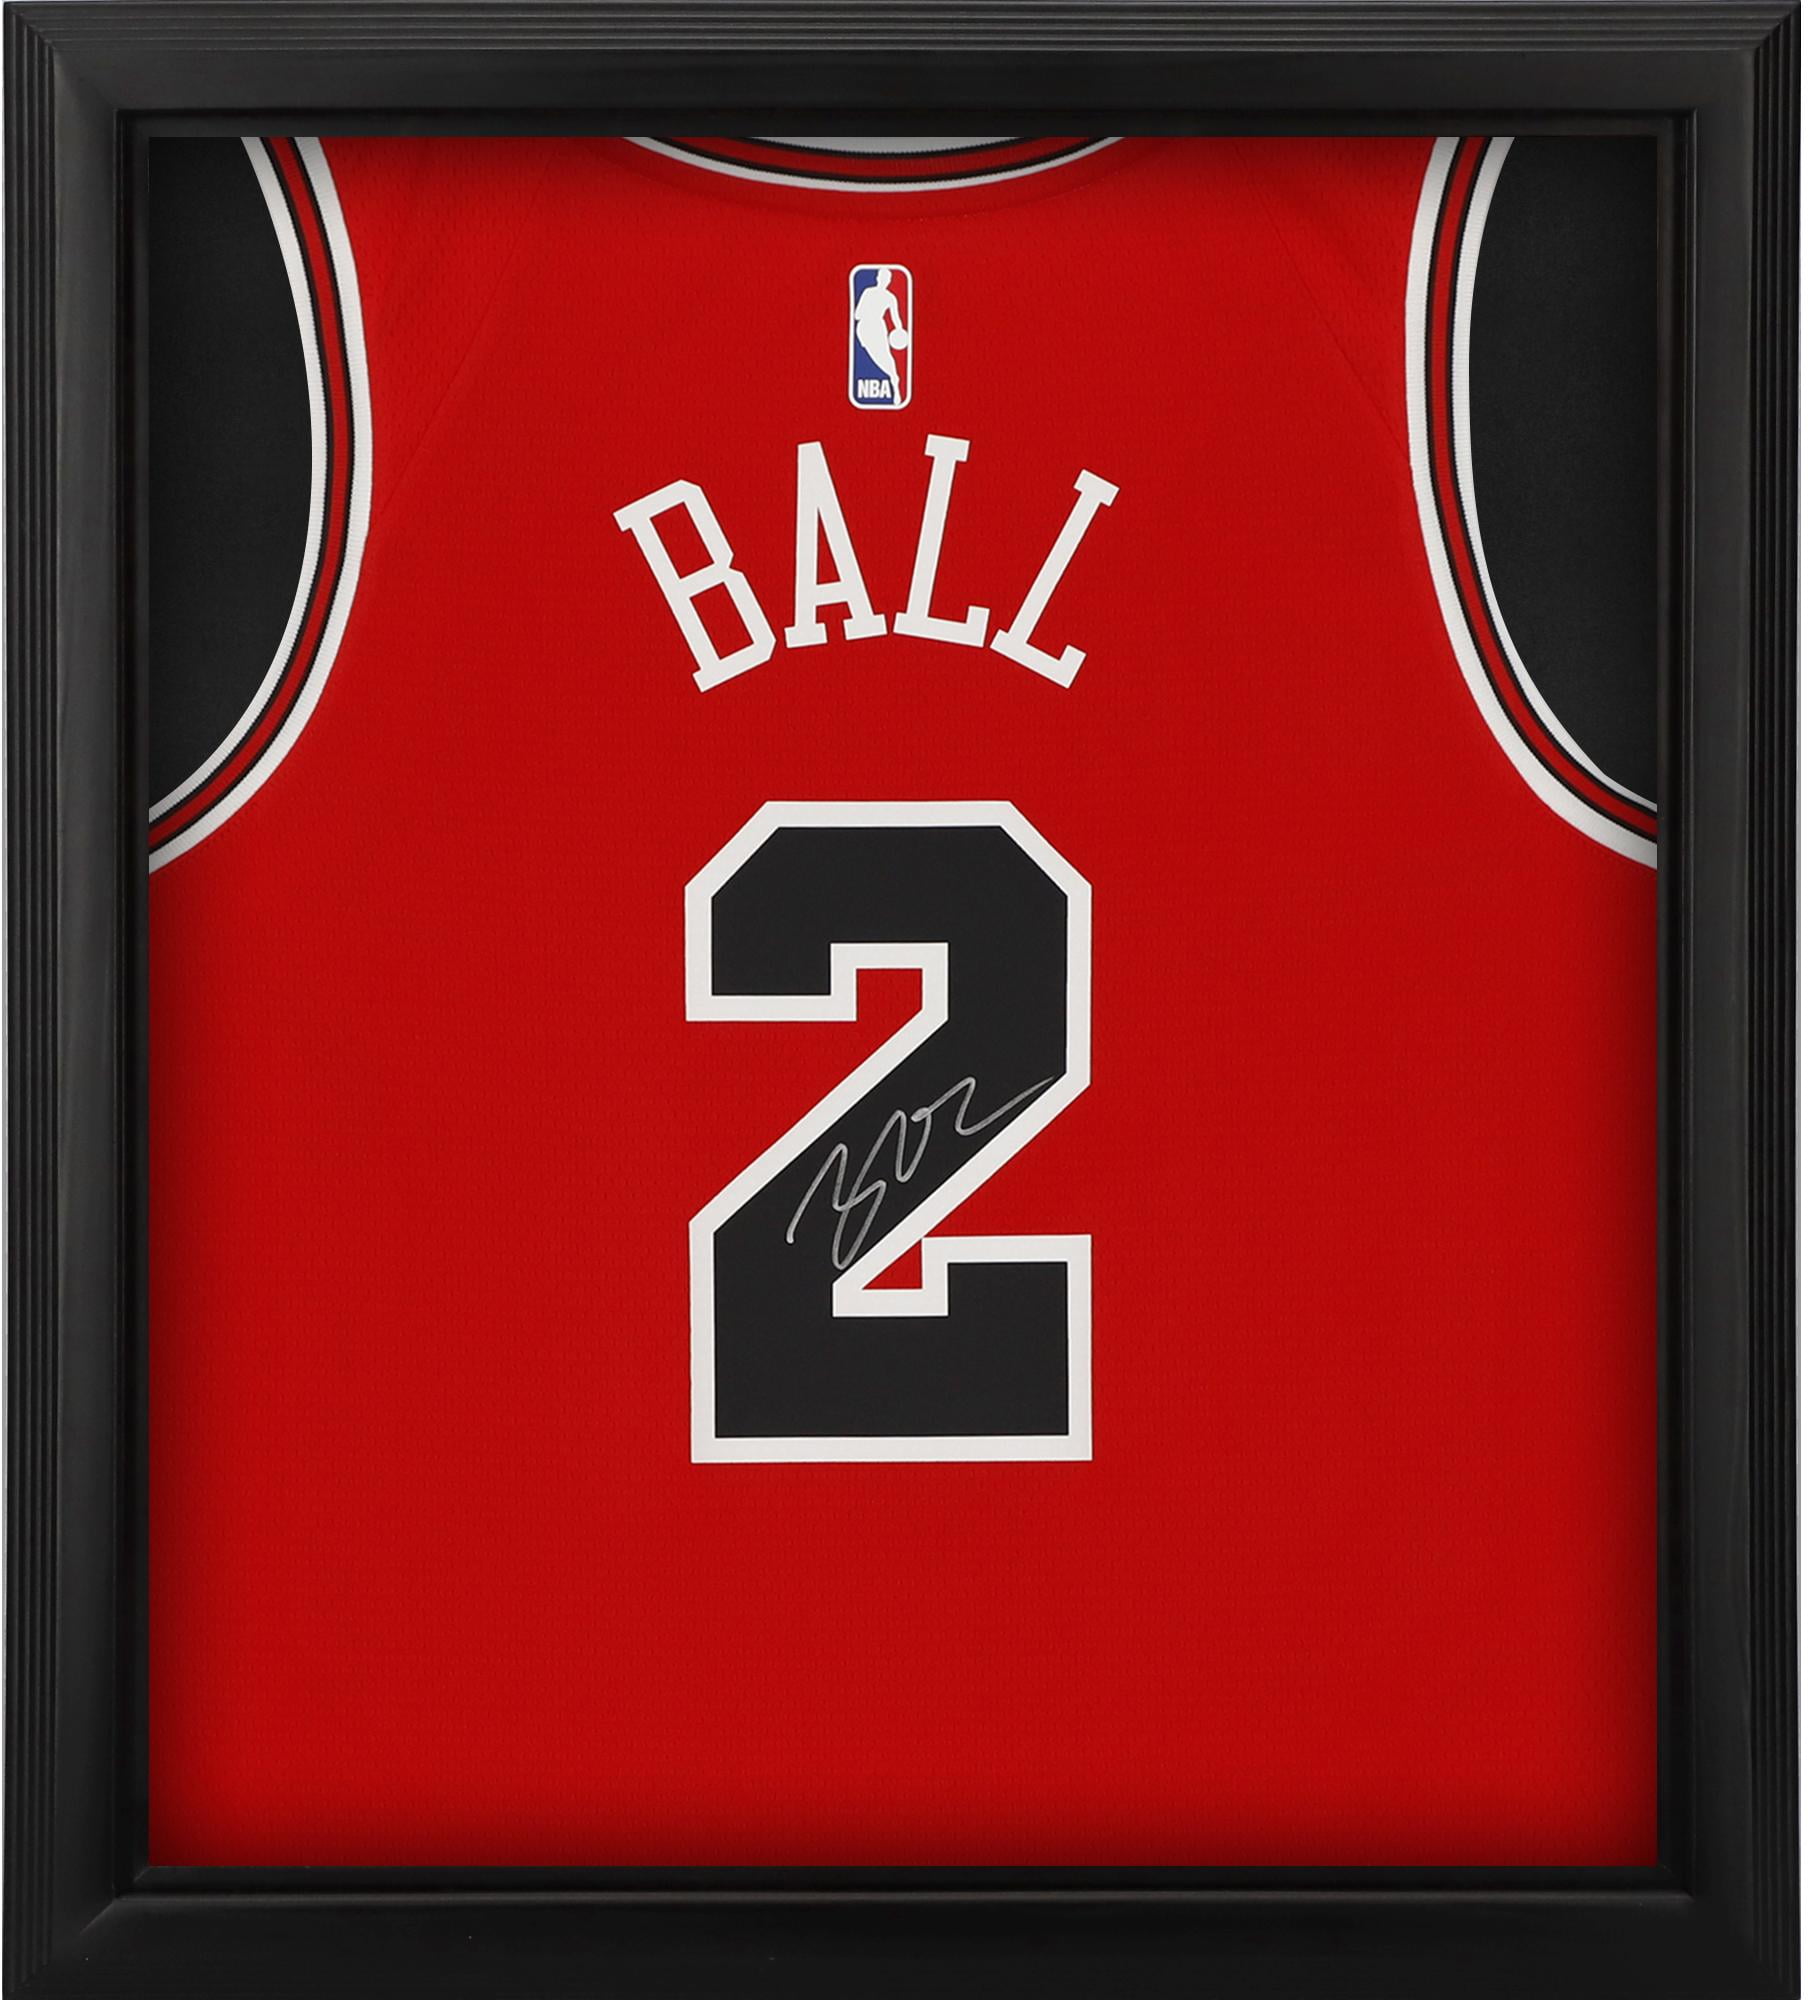 Lonzo Ball Chicago Bulls Framed Autographed Red Swingman Jersey Shadowbox - Fanatics Authentic Certified